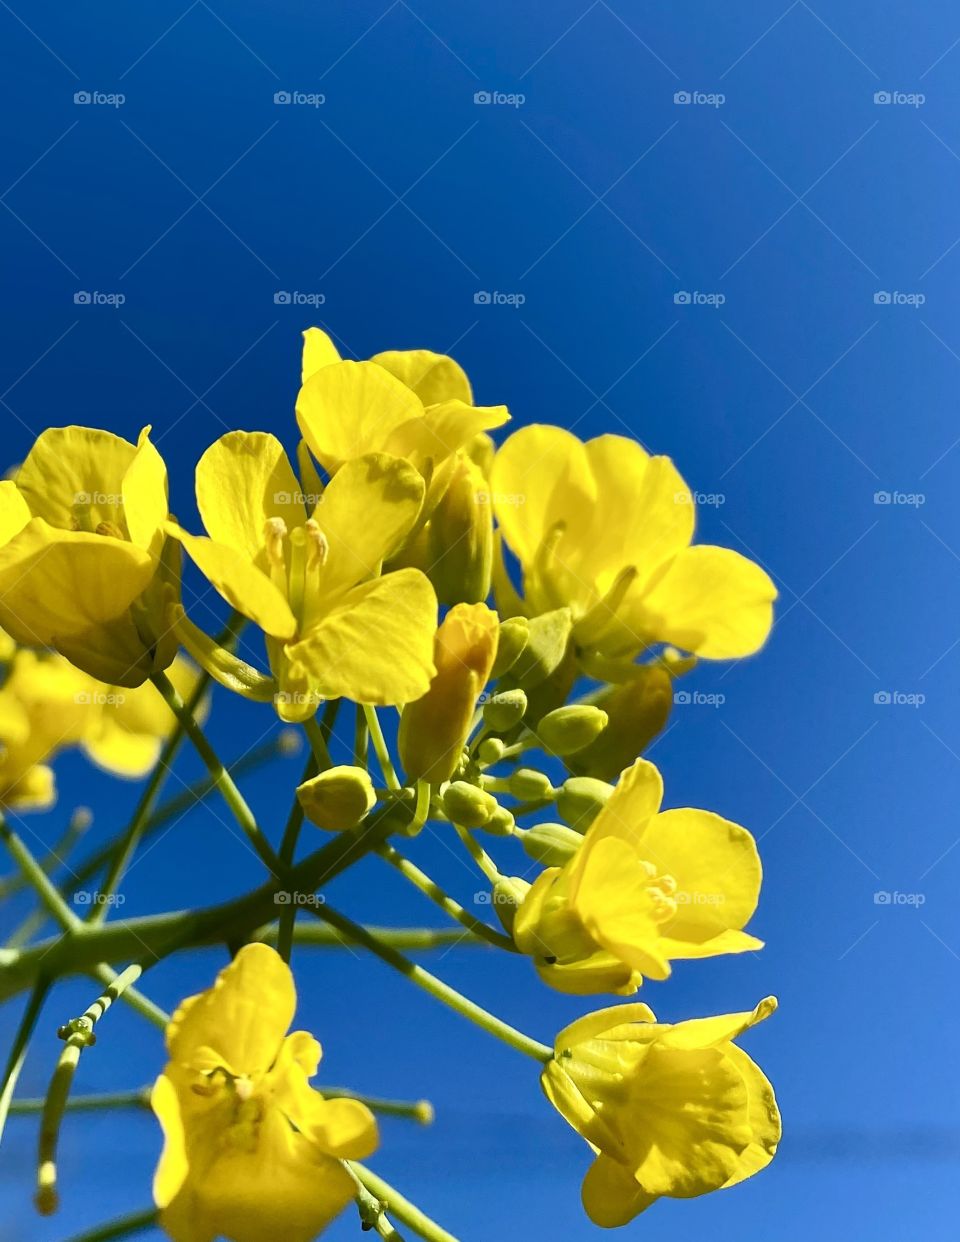 Beautiful yellow flowers against a blue sky